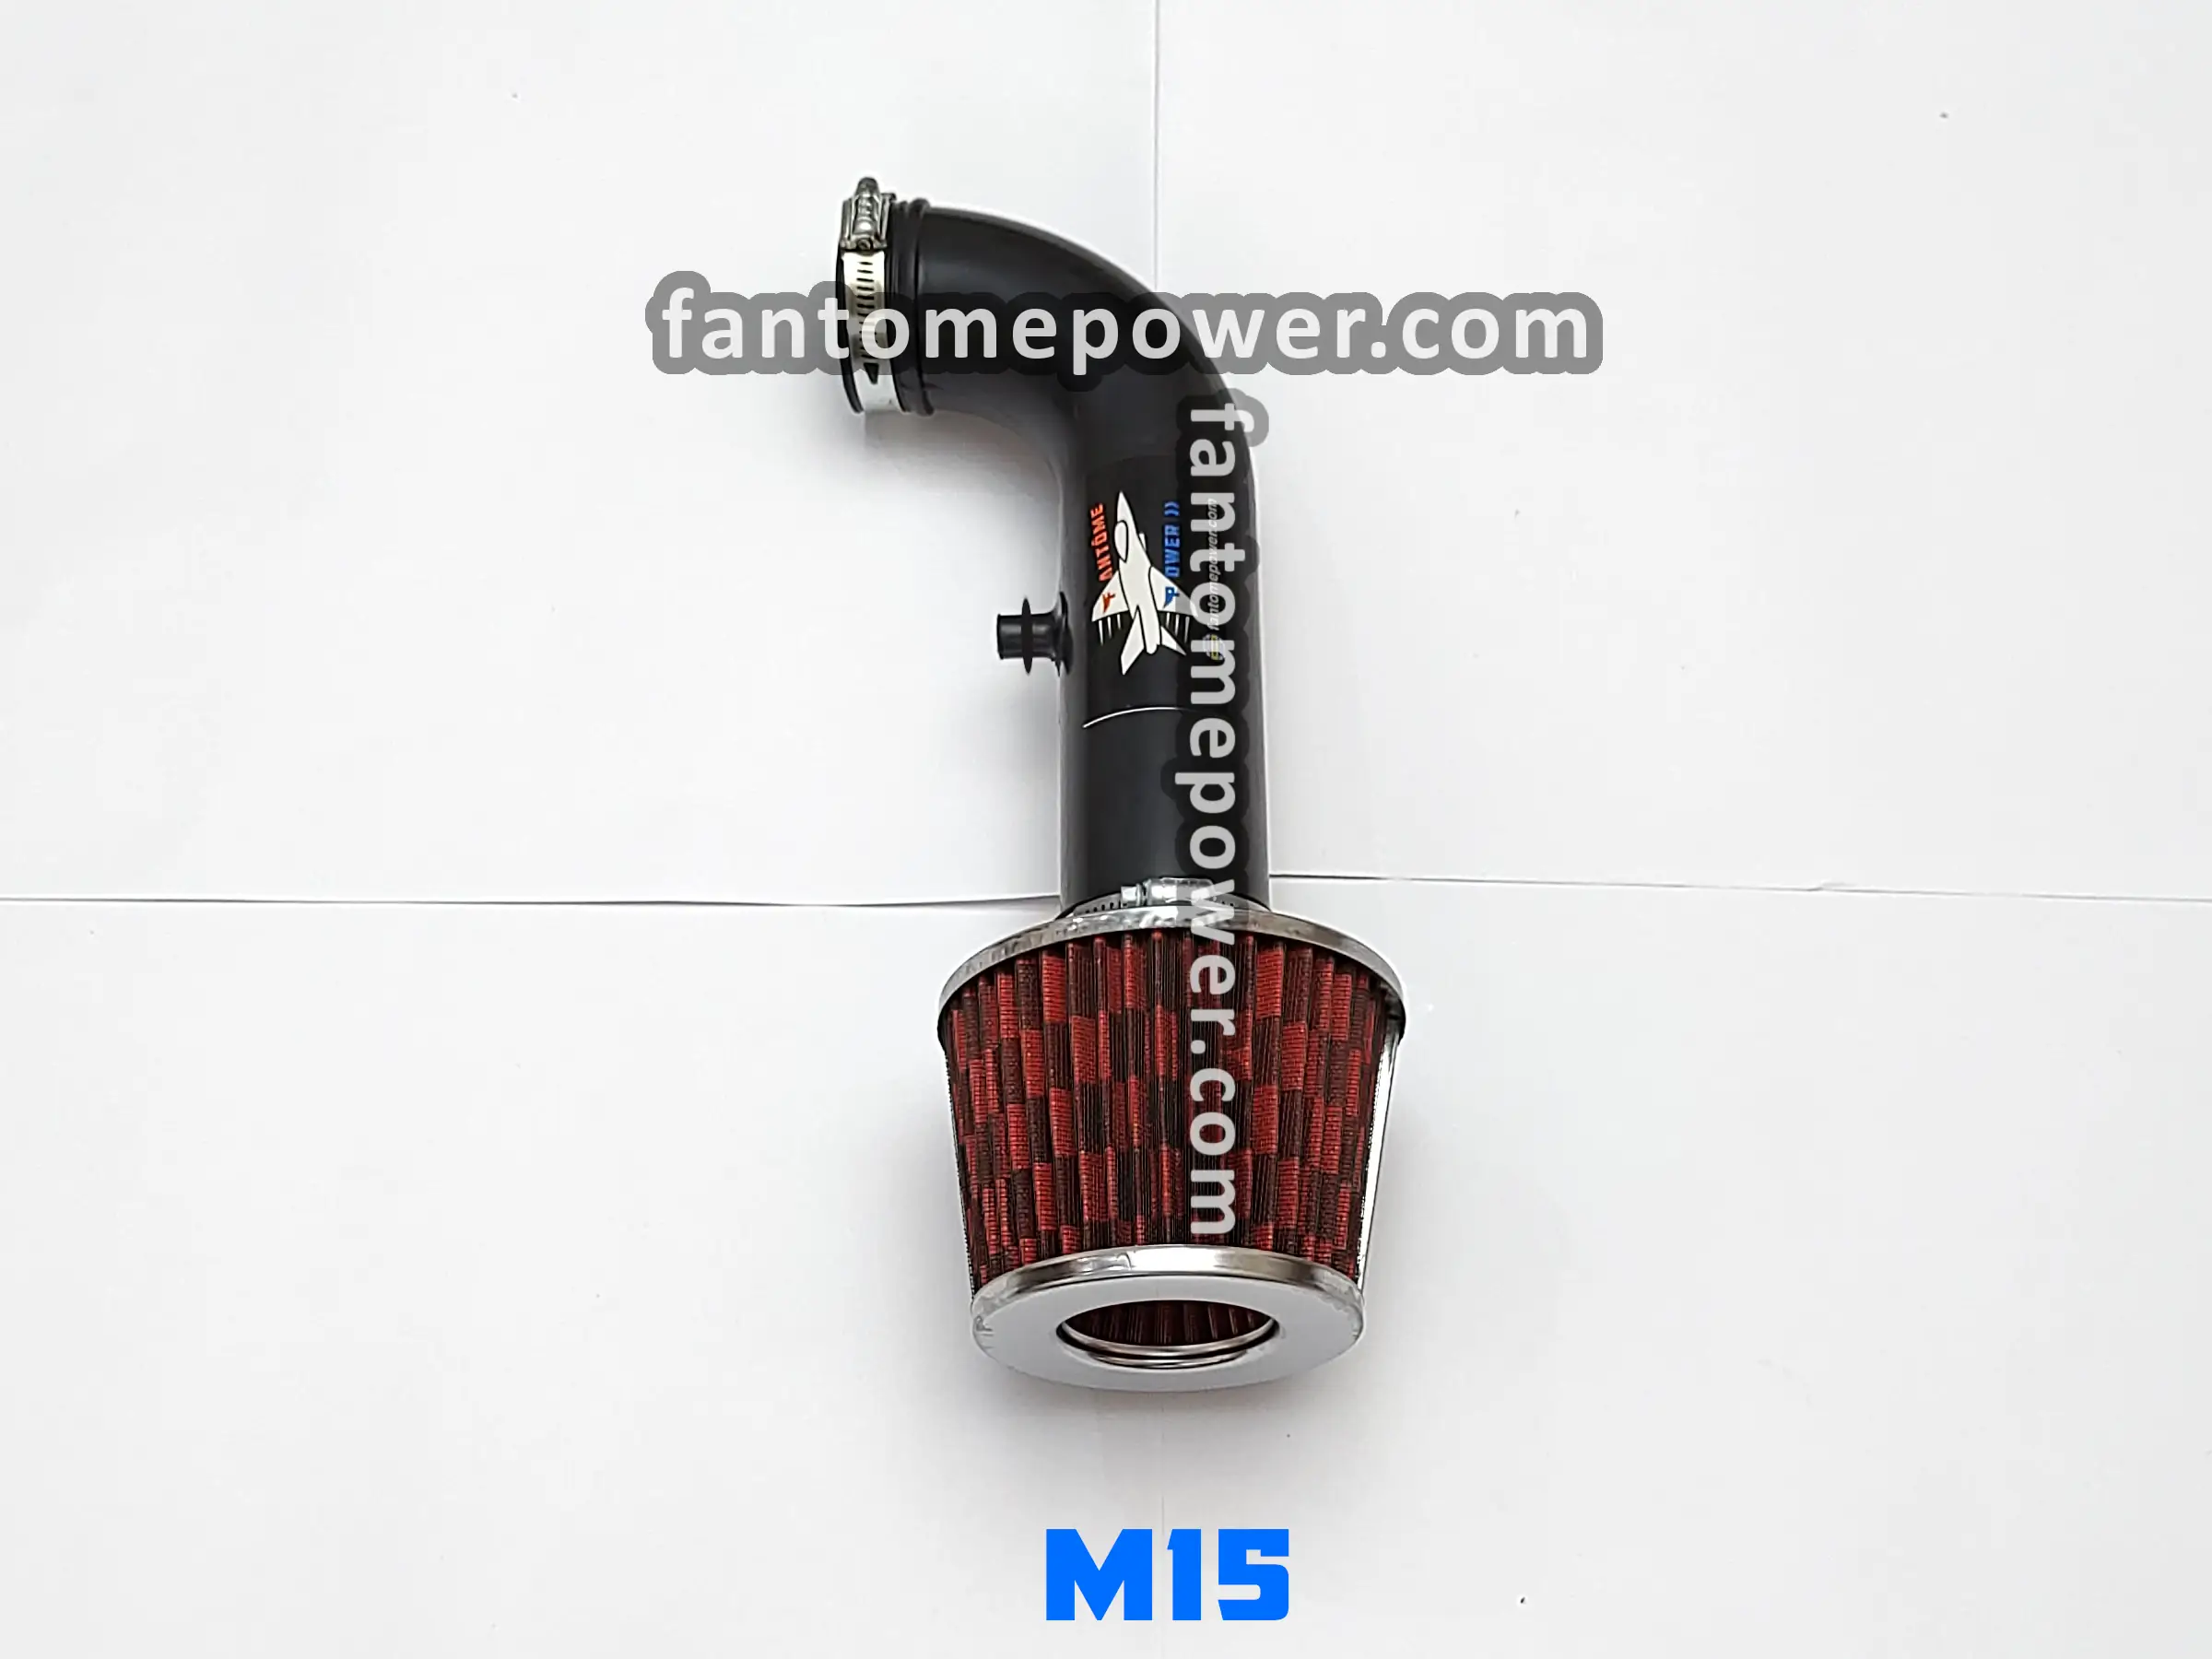 cold air intake kit for m15 engine